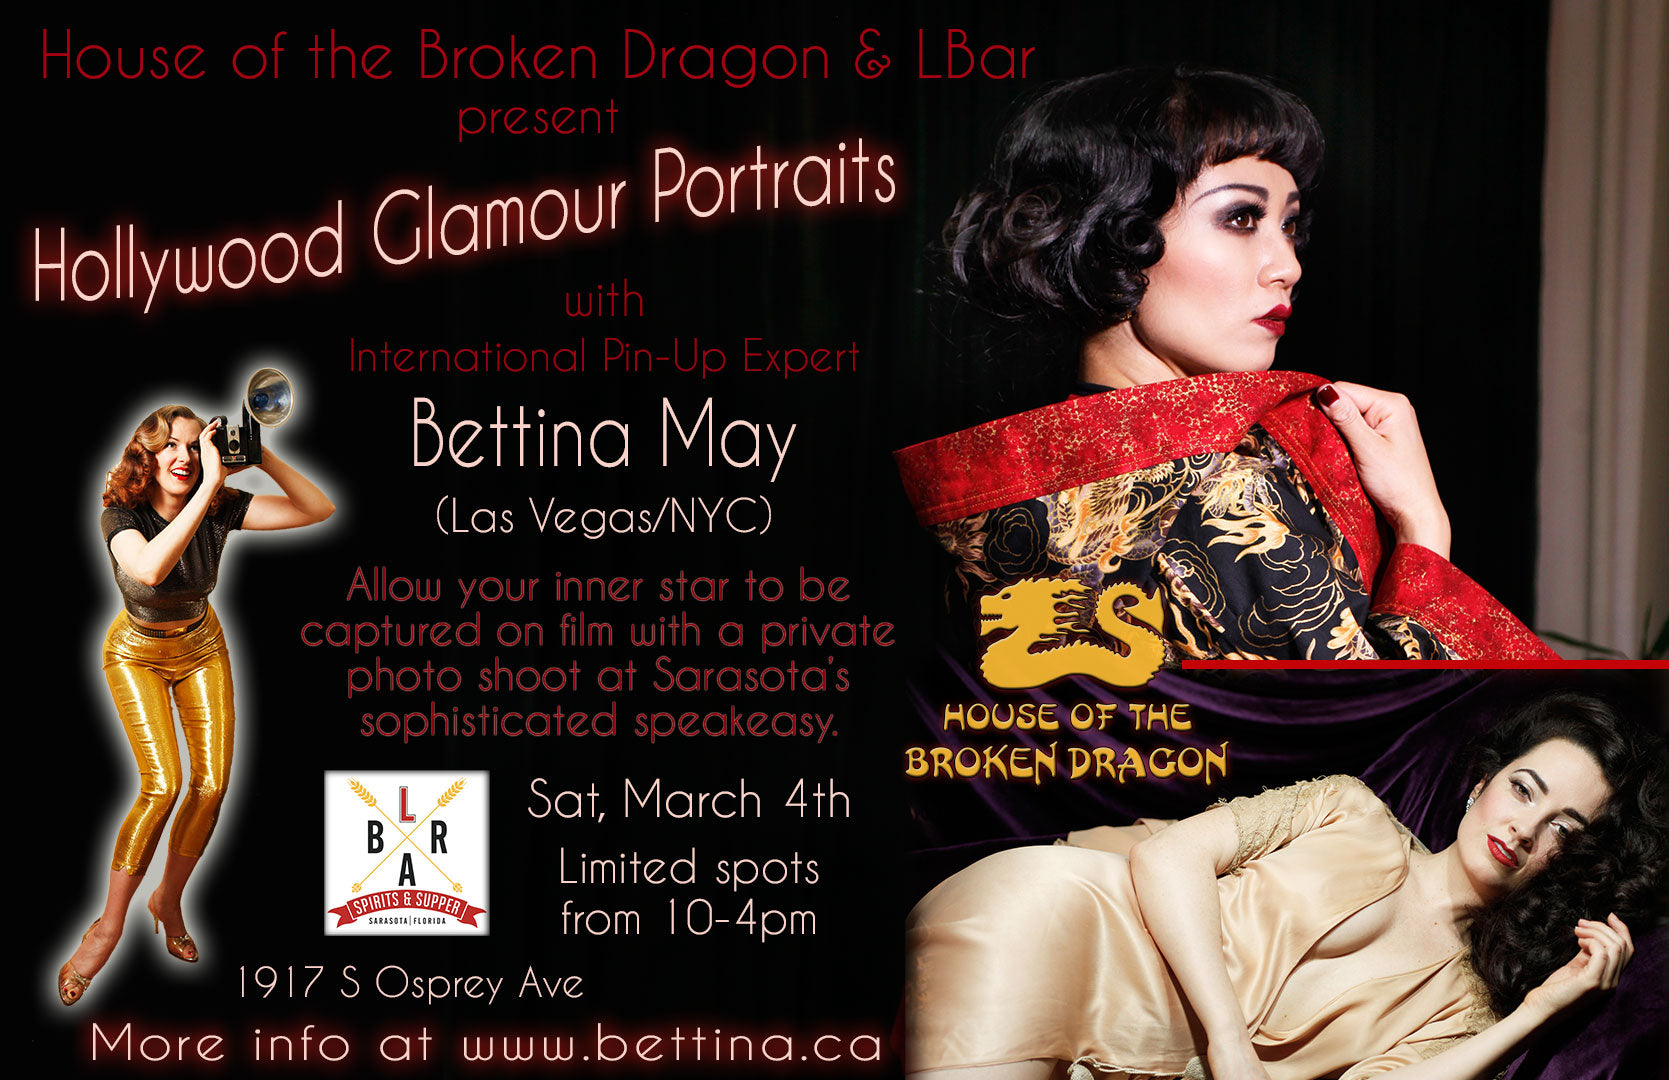 HOTBD Presents: Hollywood Glamour Portraits with Bettina May; Saturday, March 4.